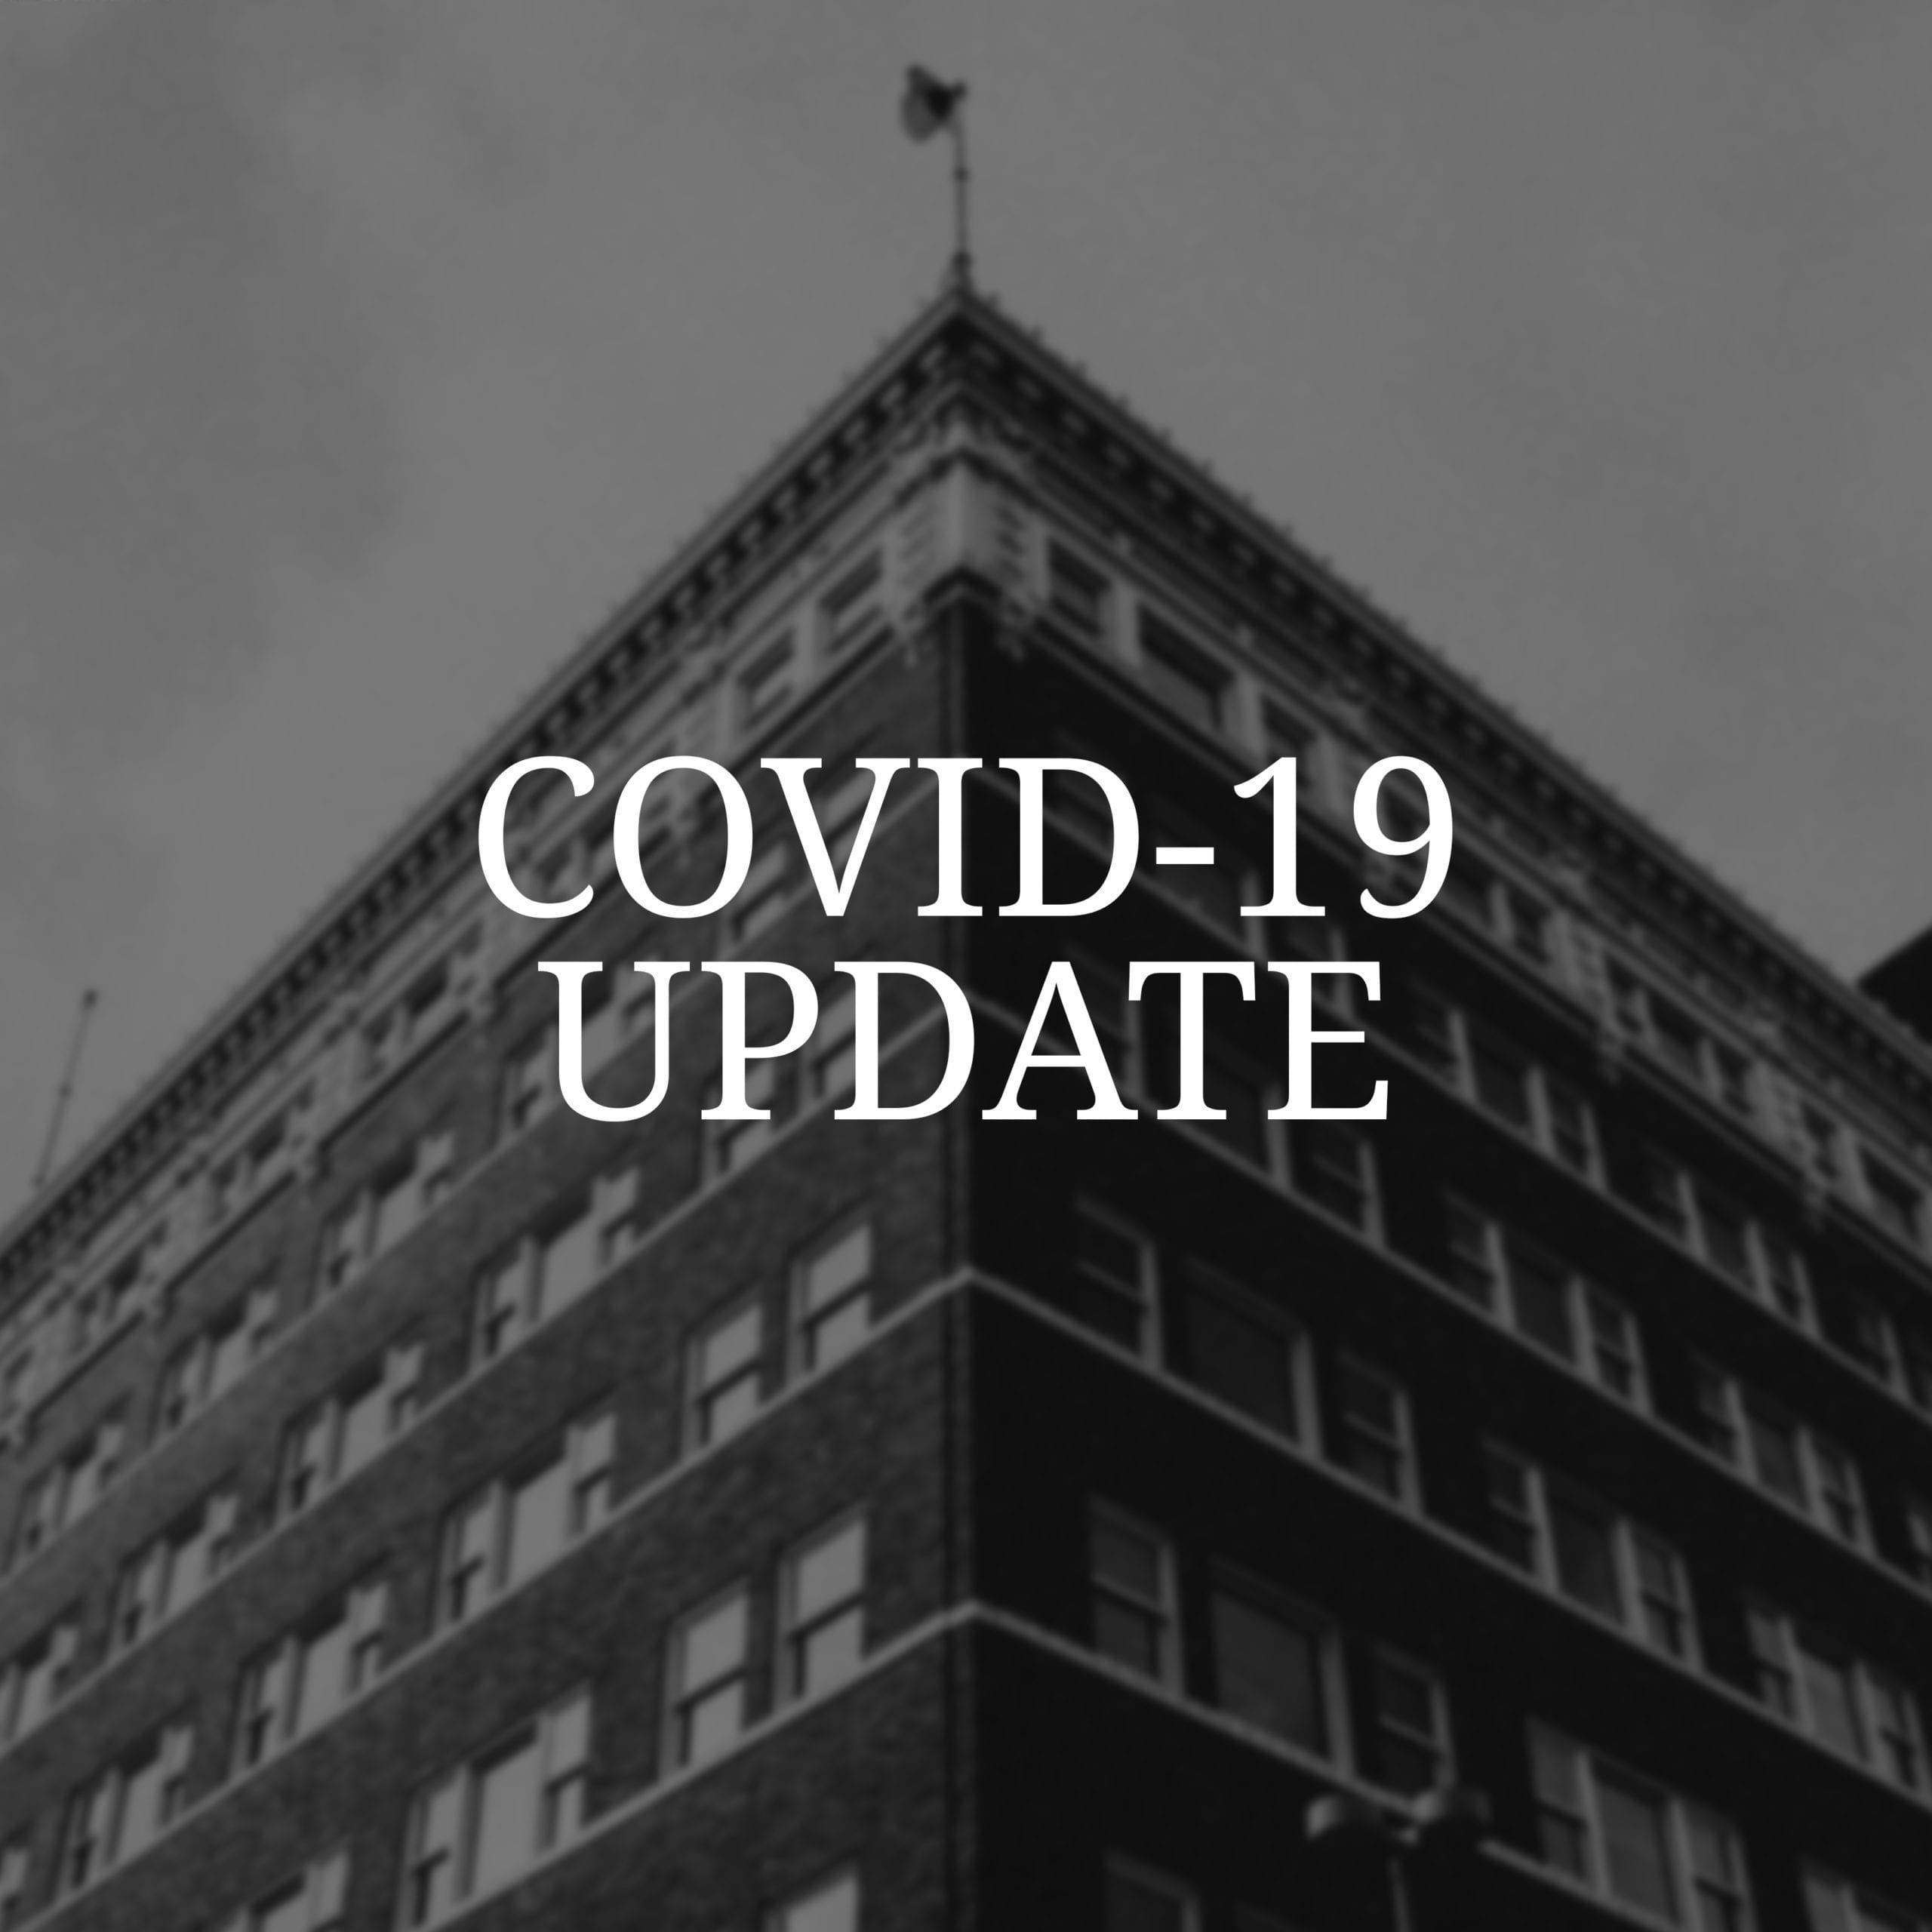 The rand and covid-19 update